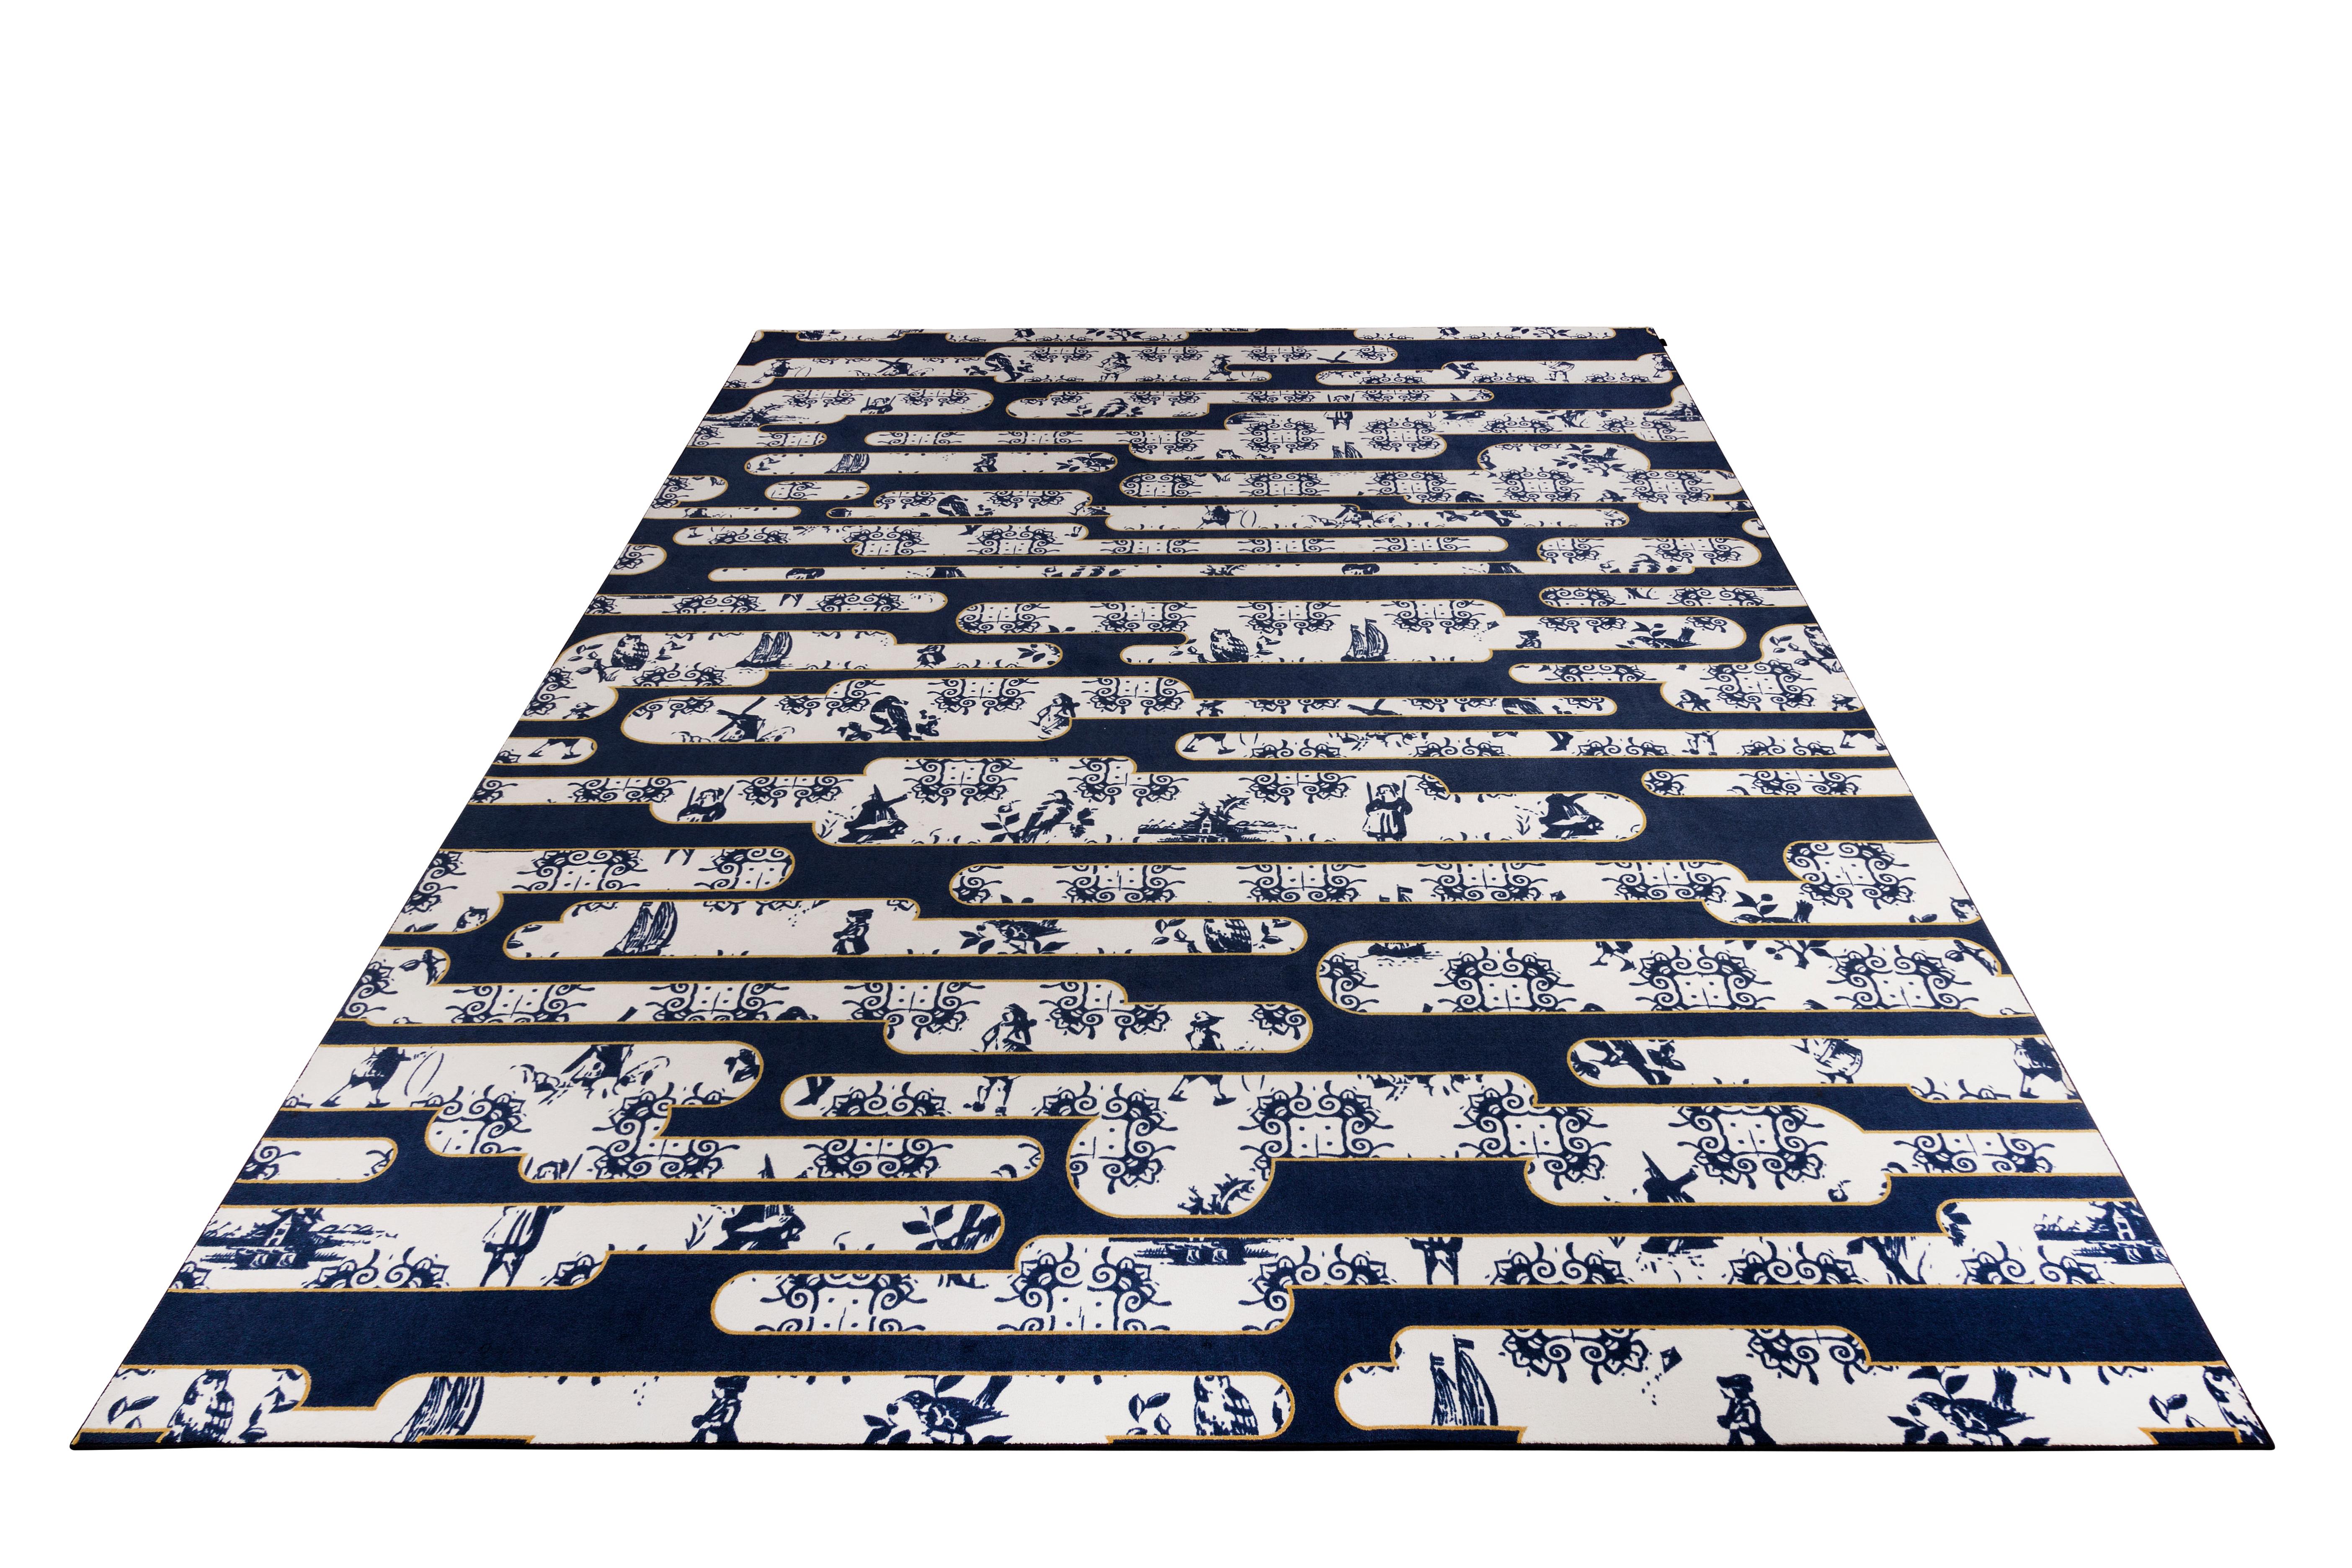 Moooi Dutch sky blue rug in soft yarn polyamide by Edward van Vliet

After his graduation from the Design Academy Eindhoven in 1989 – Edward belongs to the famous generation of Dutch designers who have been causing international sensation for many